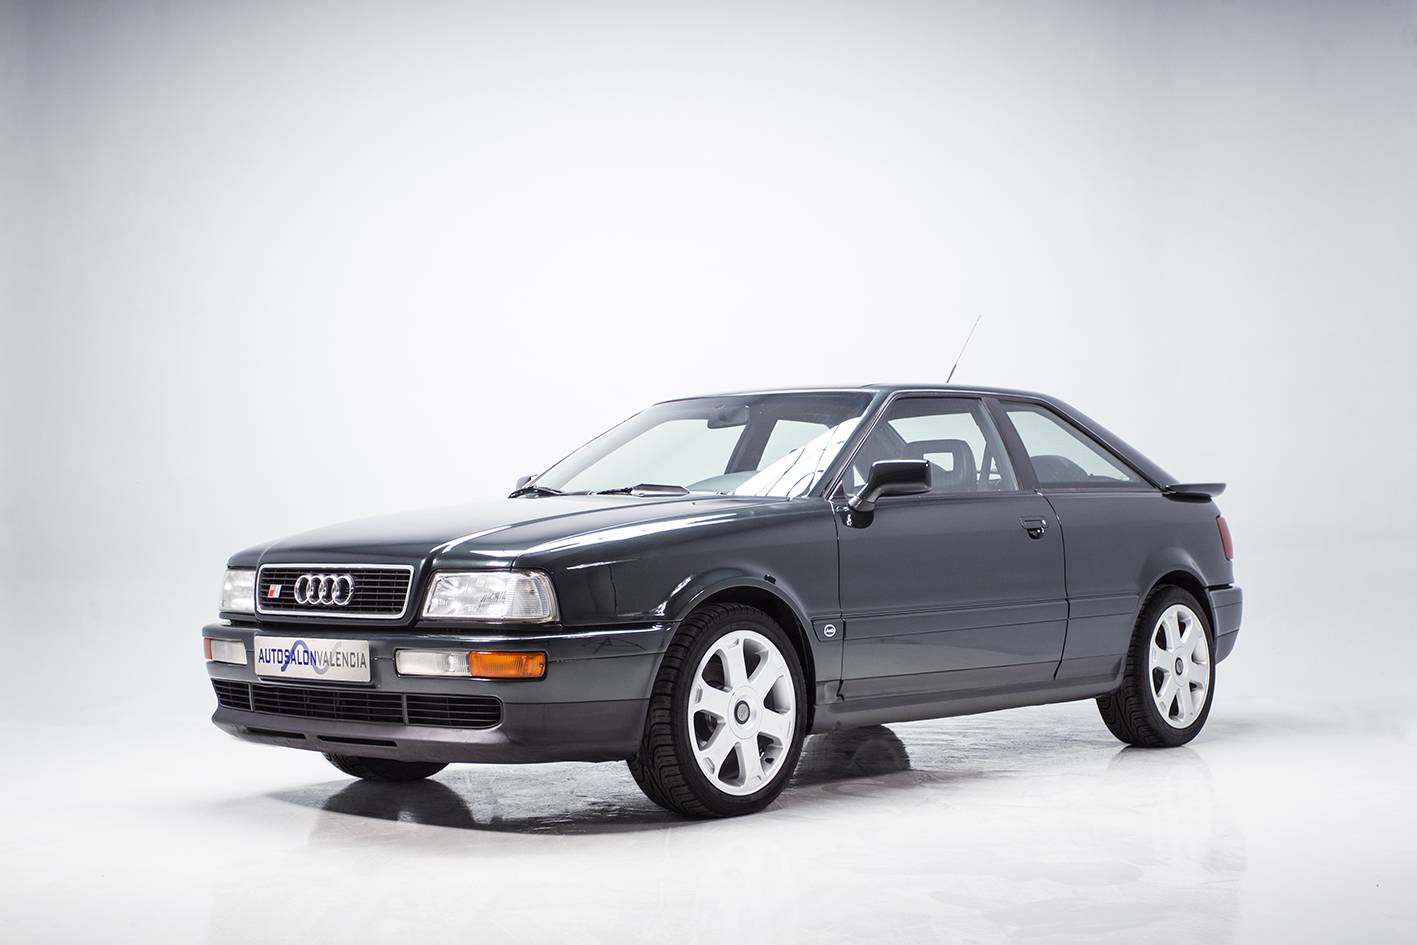 For Sale: Audi Coupe - 2.6E (1995) offered for GBP 8,799